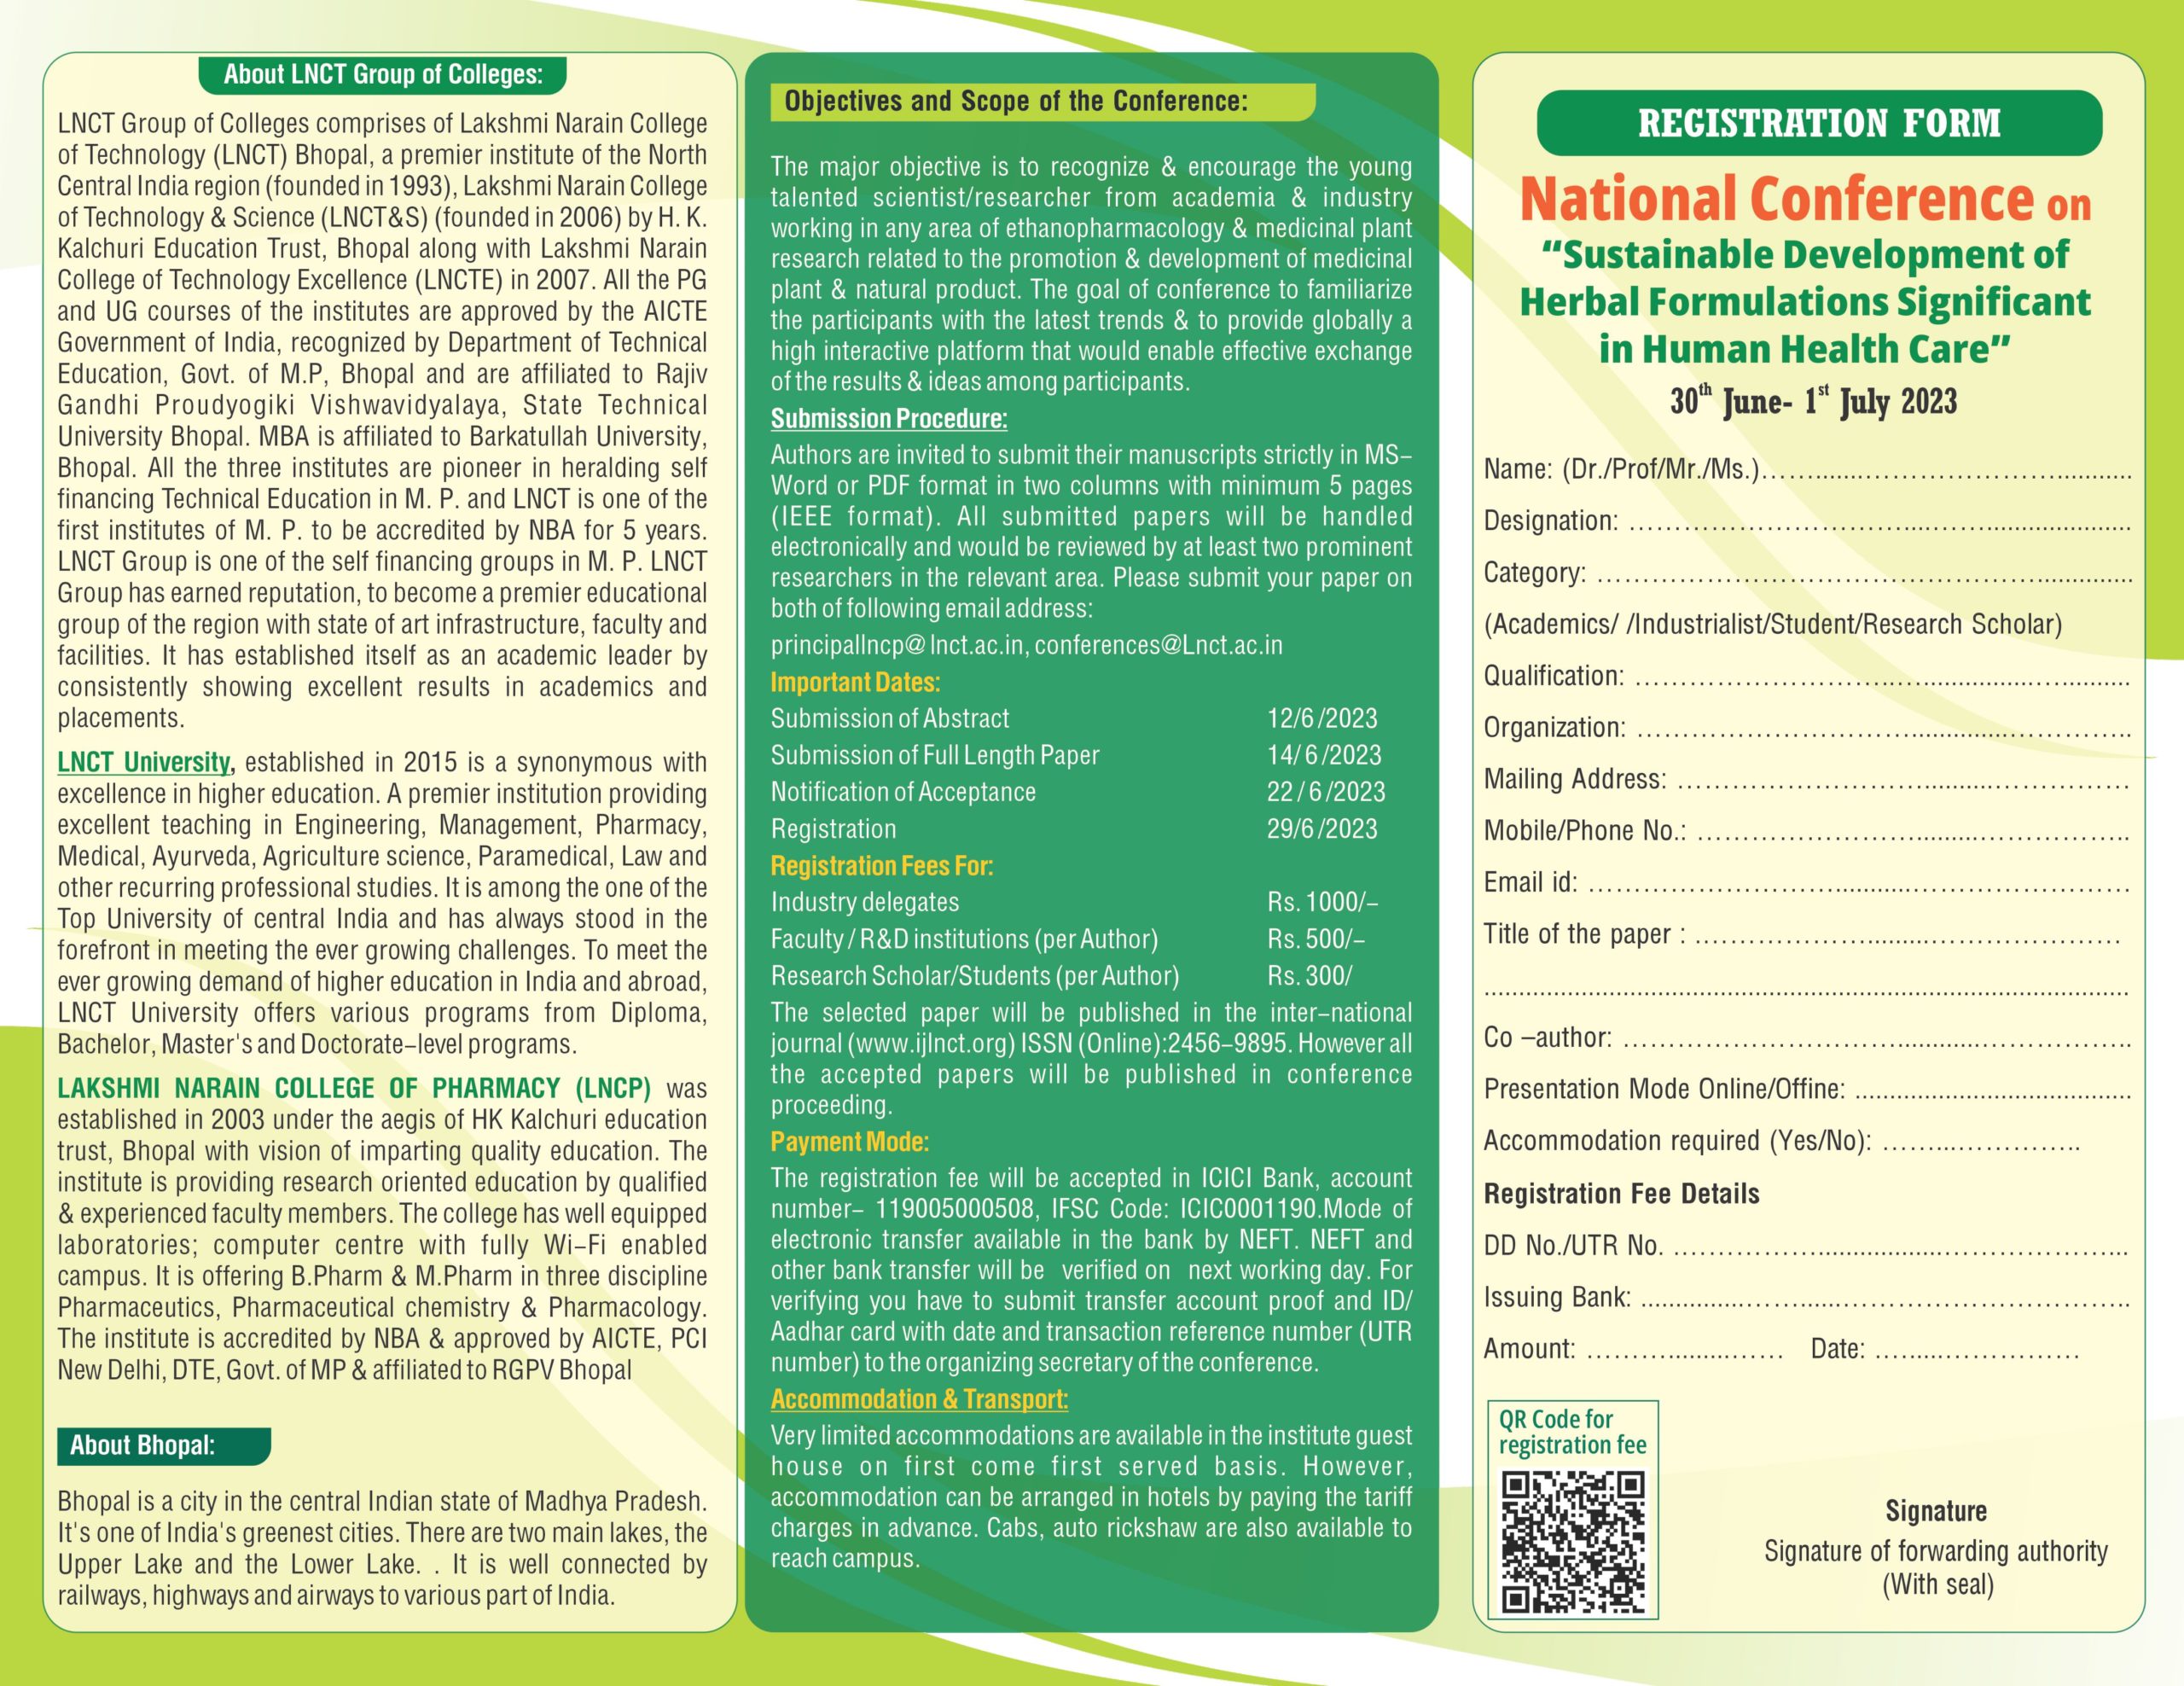 National Conference on Sustainable Development of Herbal Formulations Significant in Human Health Care 6